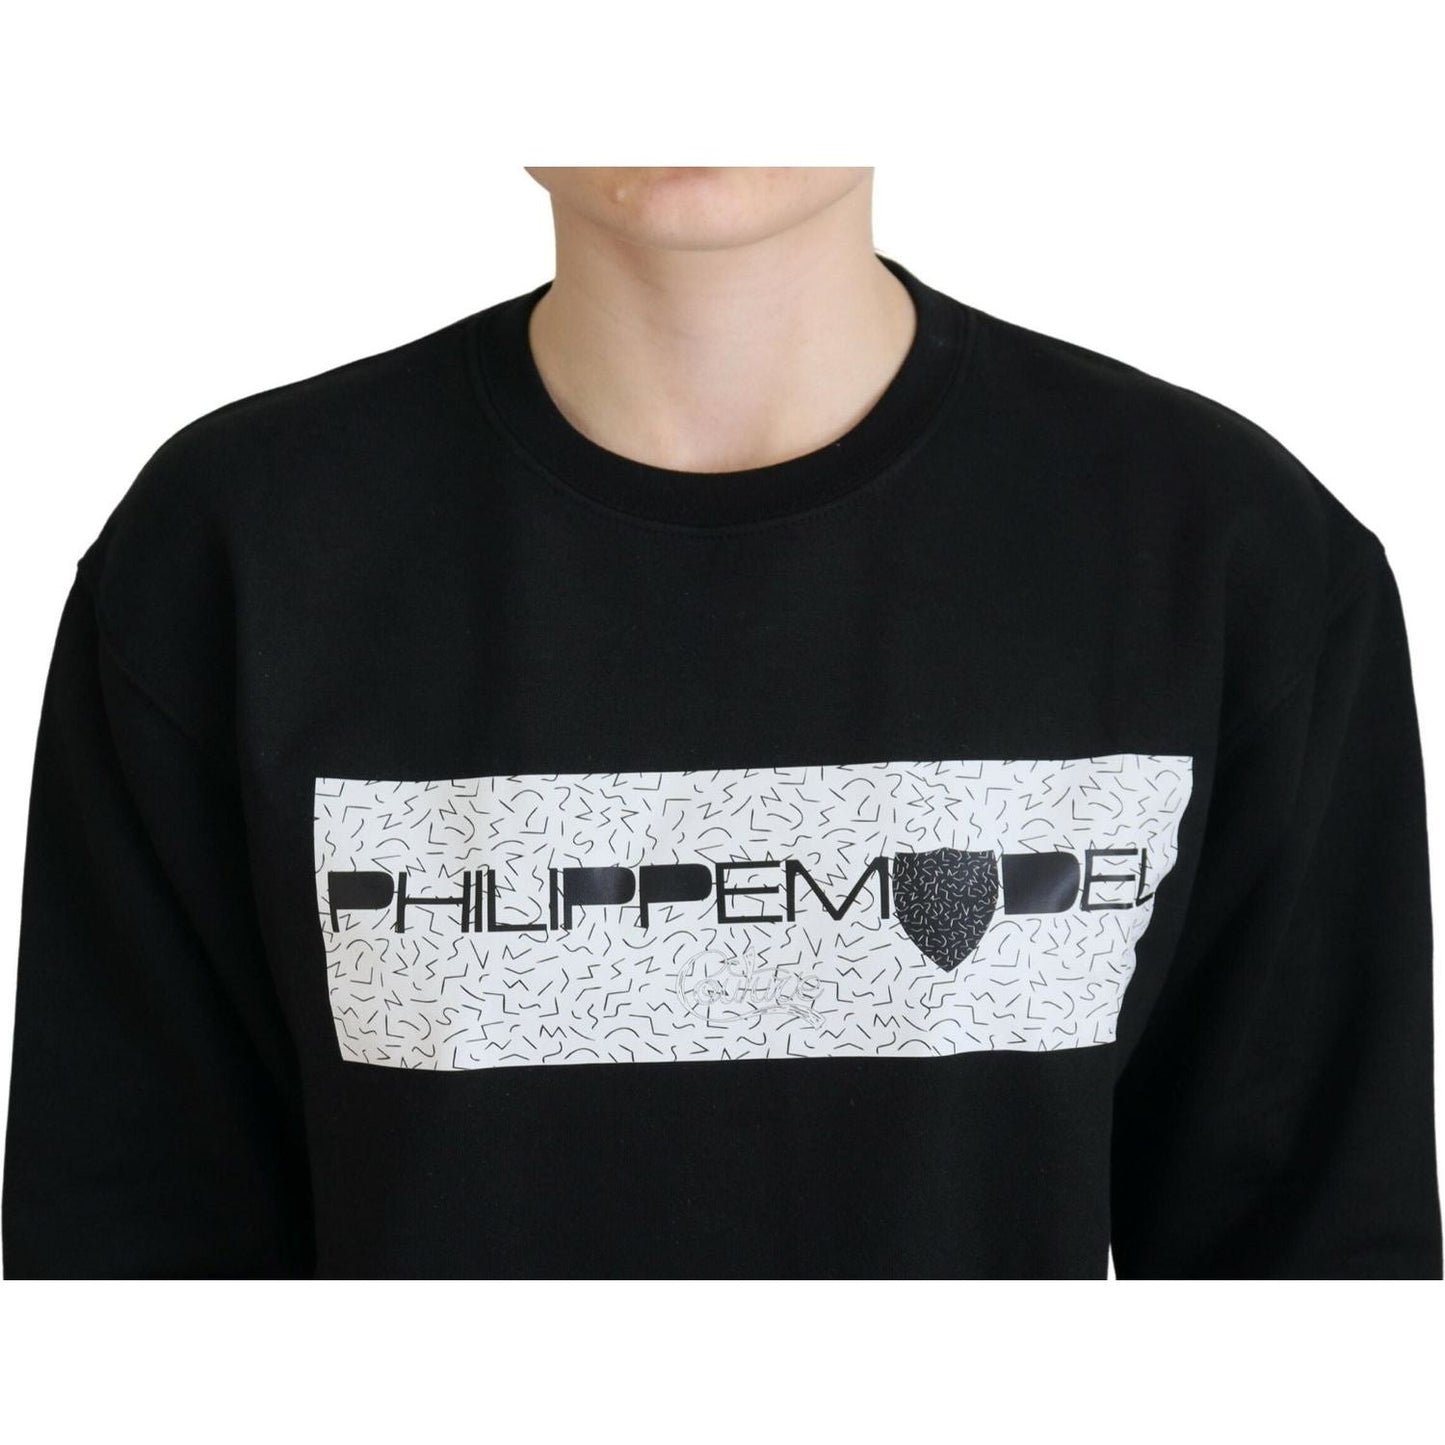 Philippe Model Chic Black Printed Cotton Sweater black-printed-long-sleeves-pullover-sweater-1 IMG_9219-scaled-c5d22b4c-35f.jpg